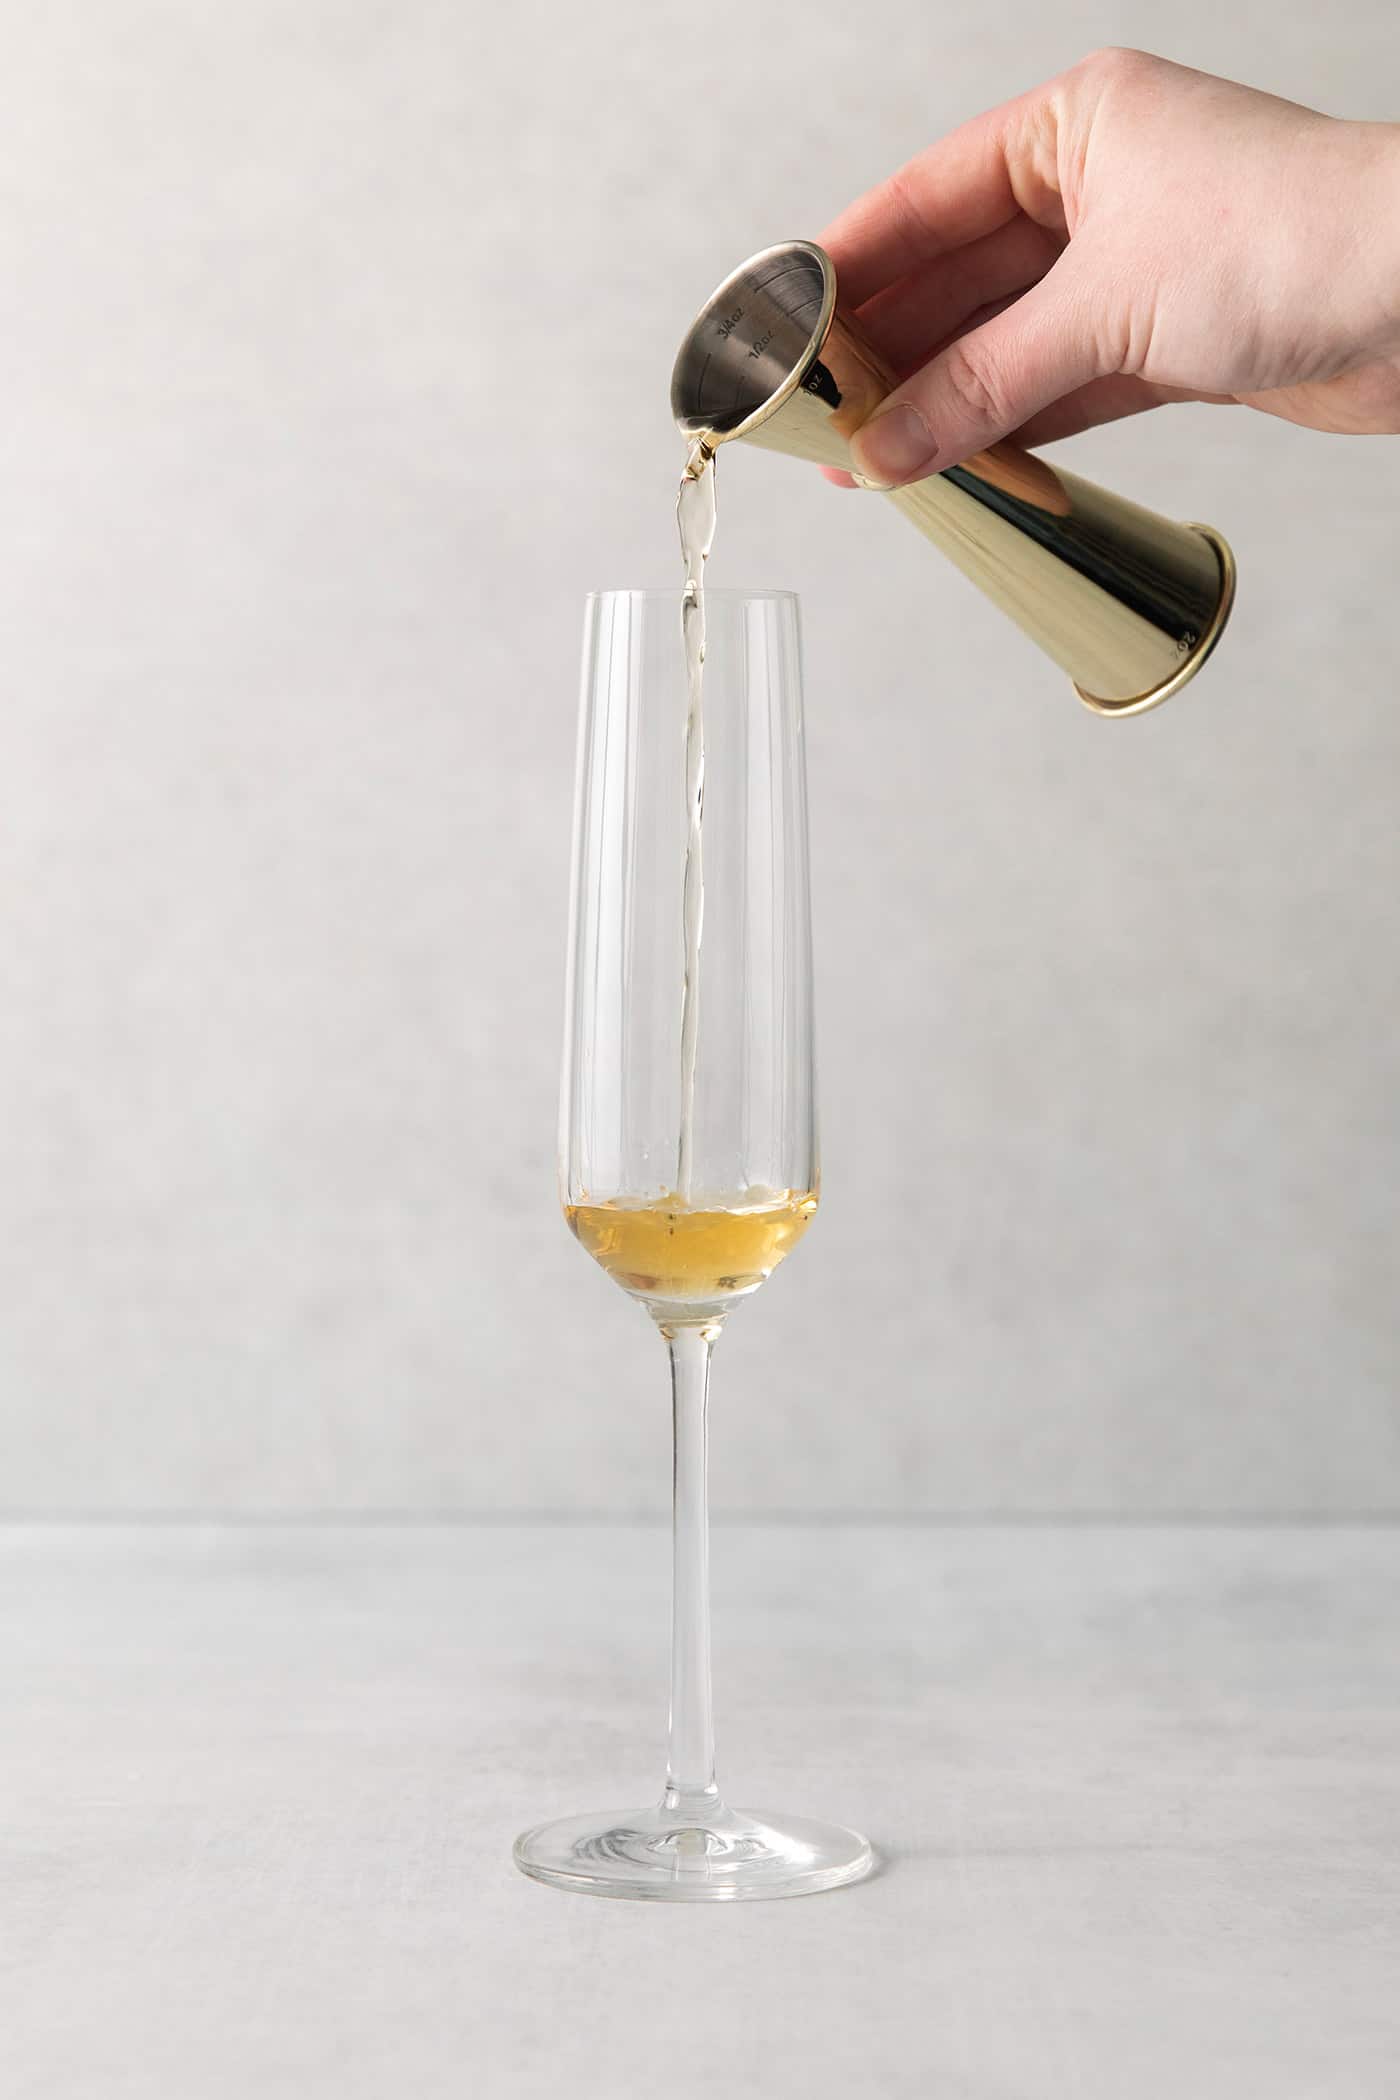 St Germain being poured into a champagne flute